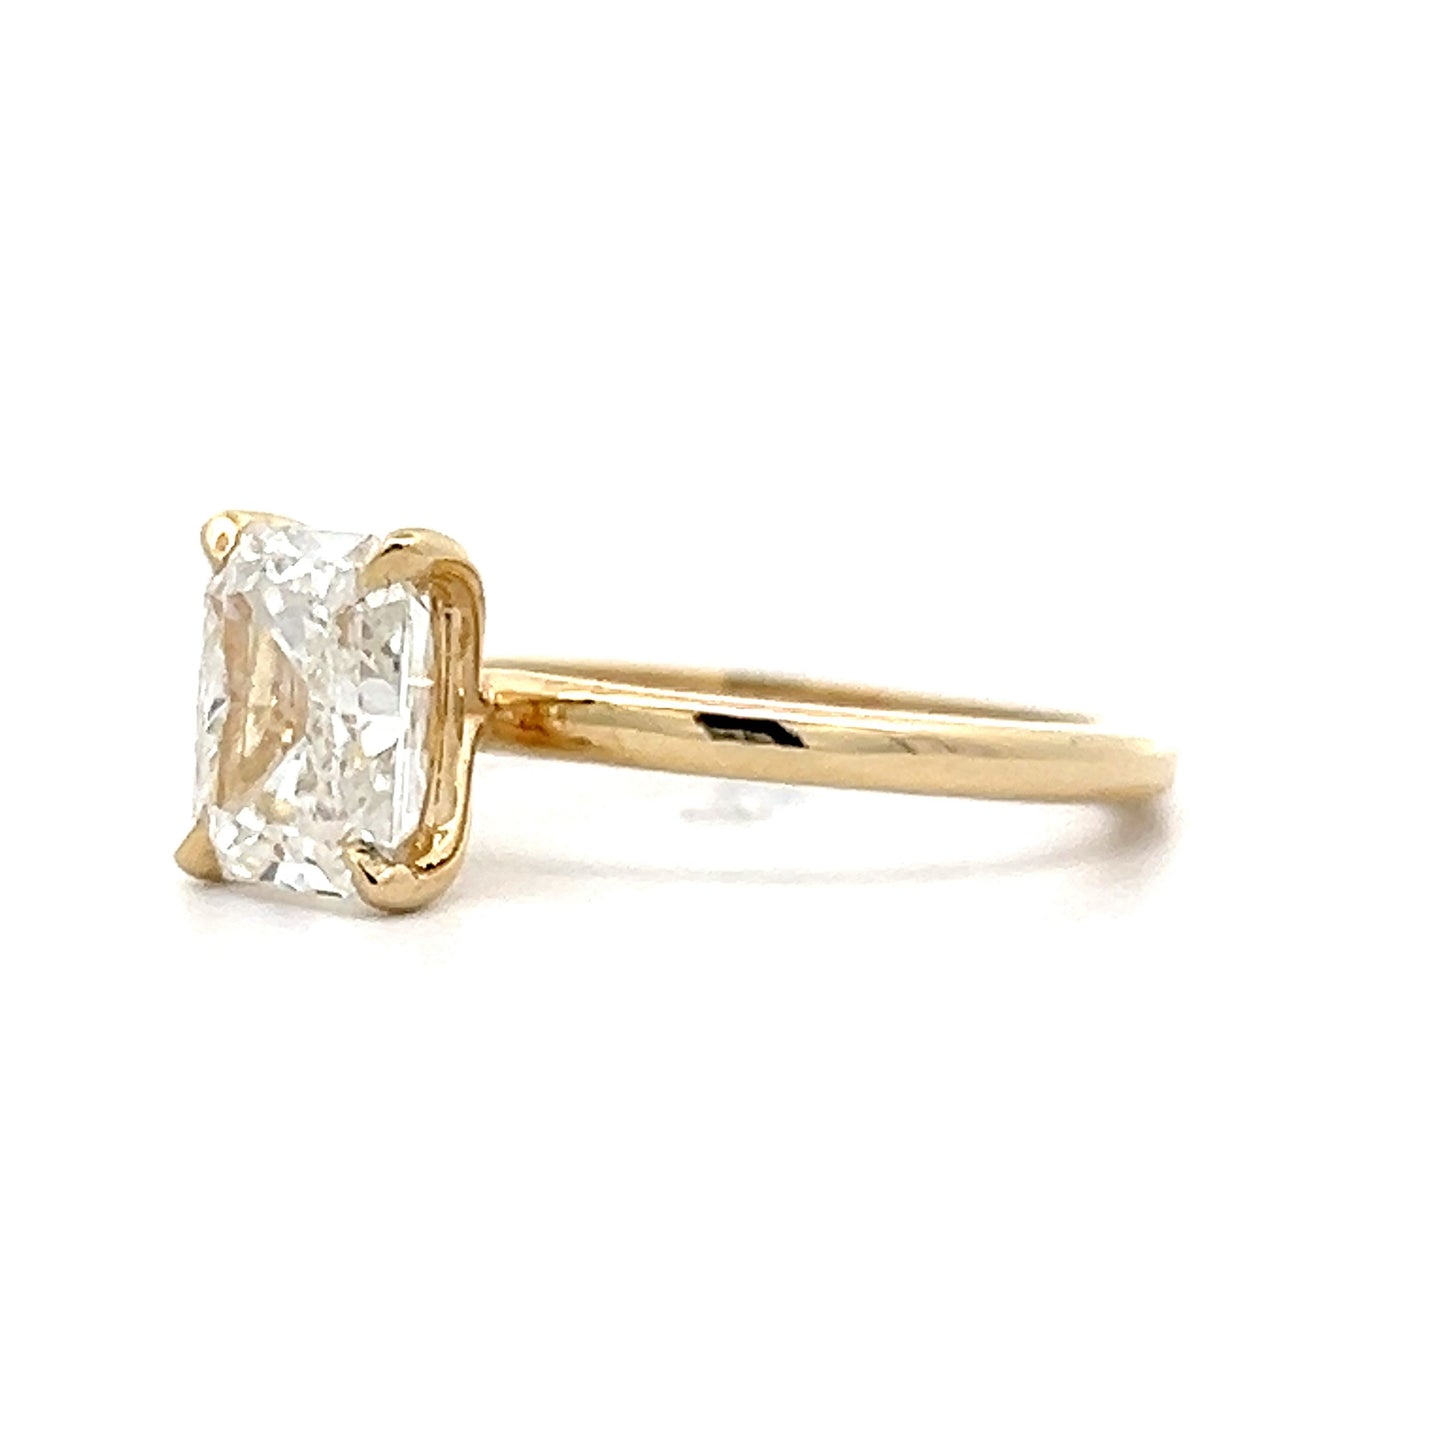 1.90 Radiant Cut Diamond Engagement Ring in Yellow Gold